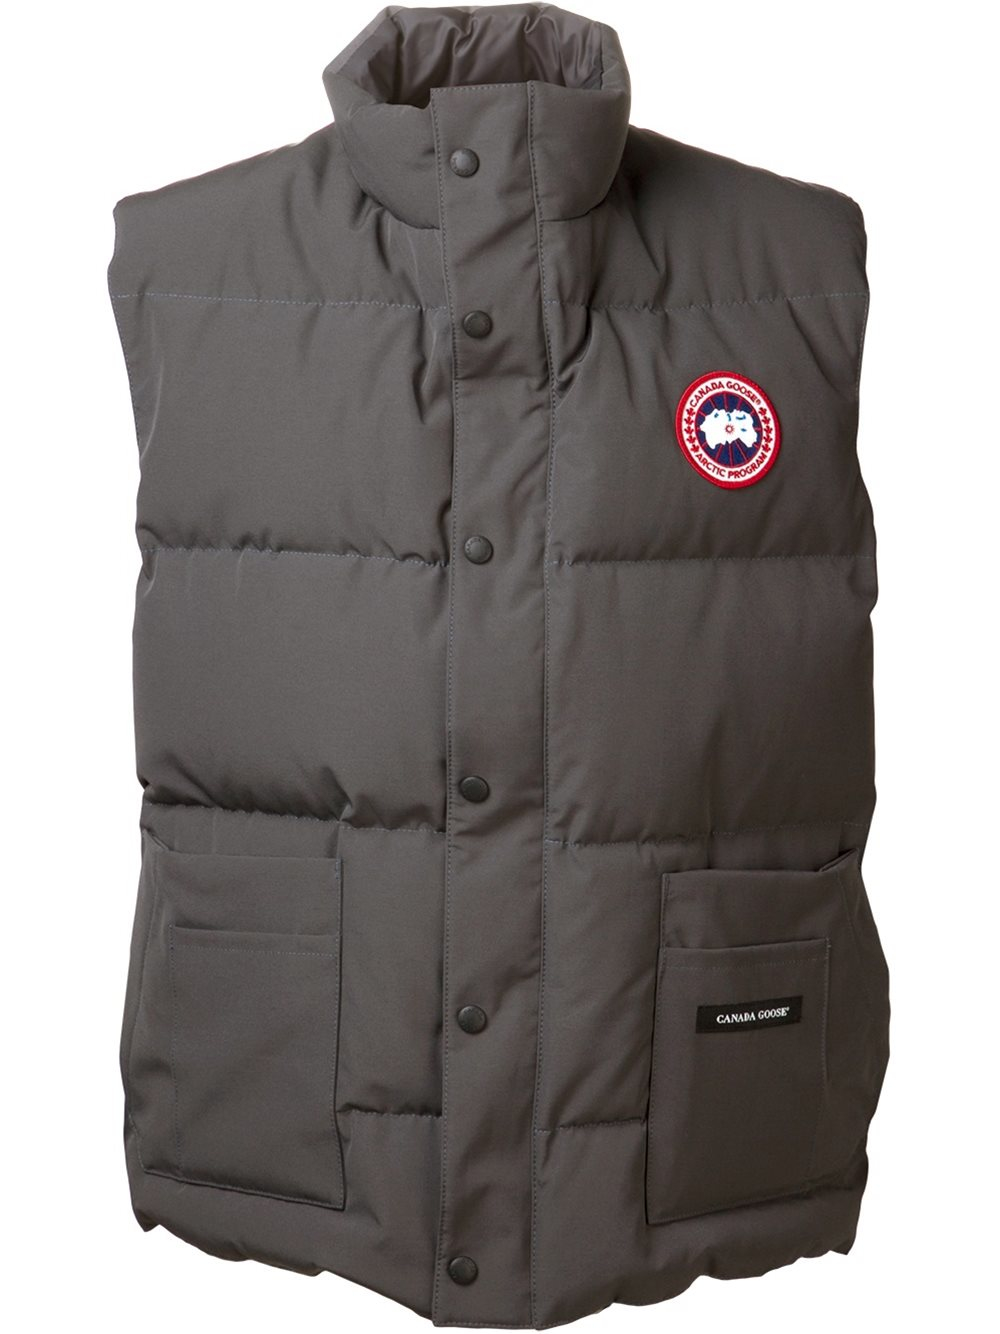 Canada Goose Goose 'freestyle' Gilet in Grey (Grey) for Men - Lyst